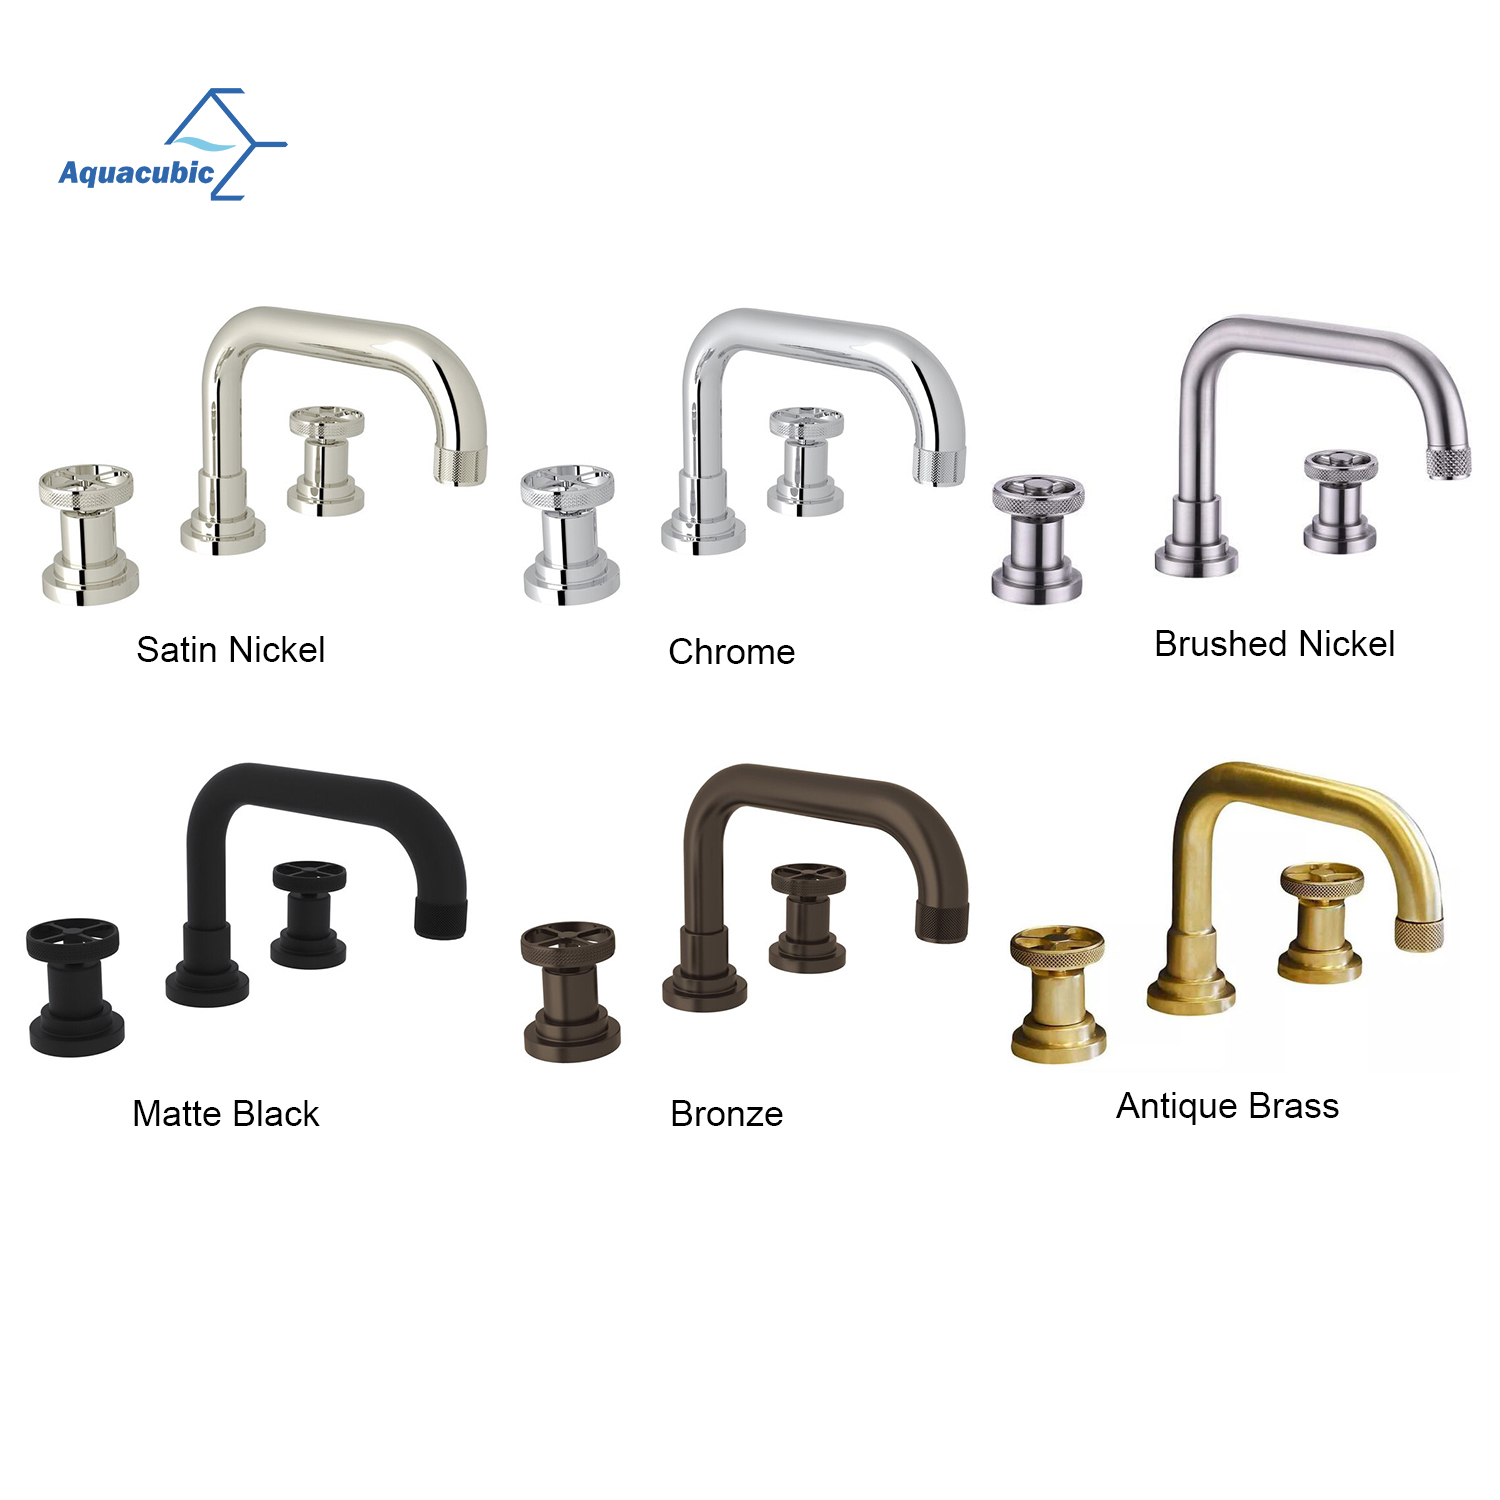 Aquacubic Luxury Deck Mounted Industrial Bathroom Faucet for 3-Holes 8-in Wide Spread Set